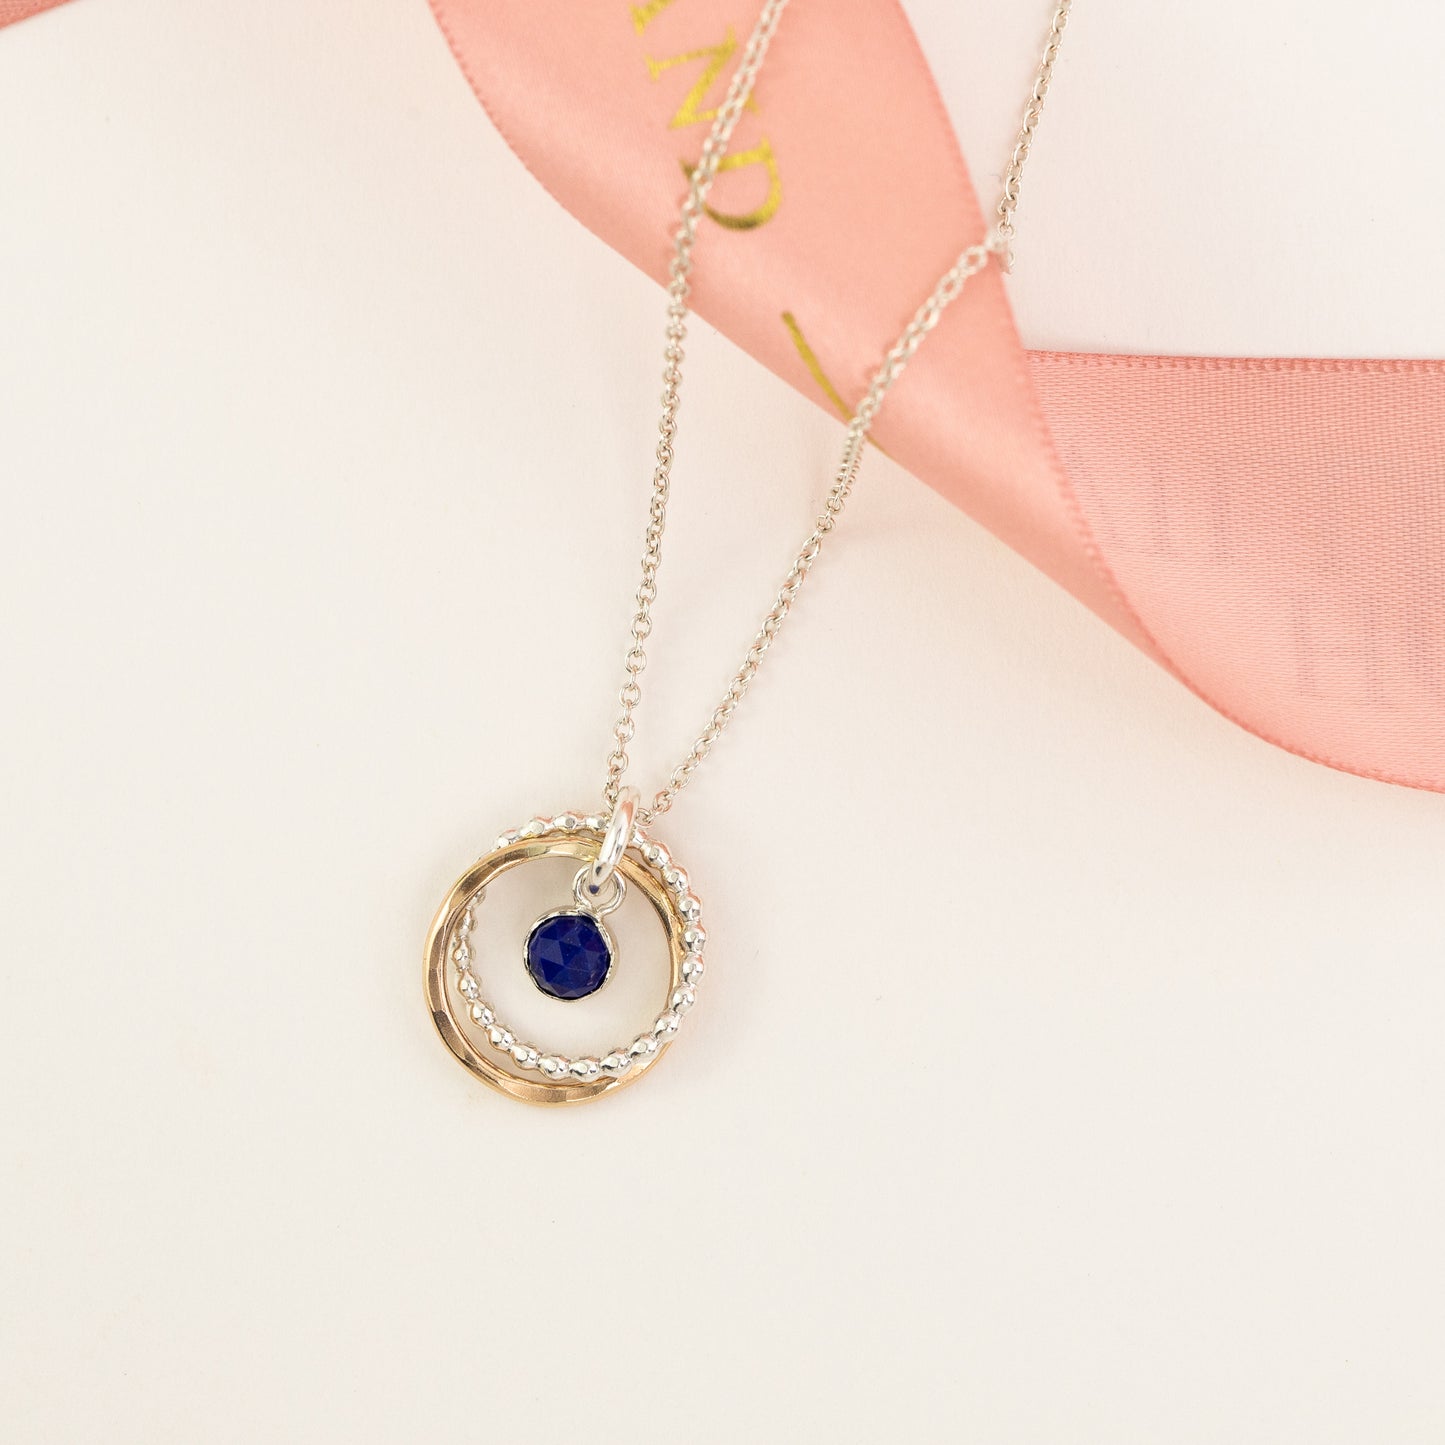 9th Anniversary Gift - Lapis Lazuli Necklace - Silver & Gold